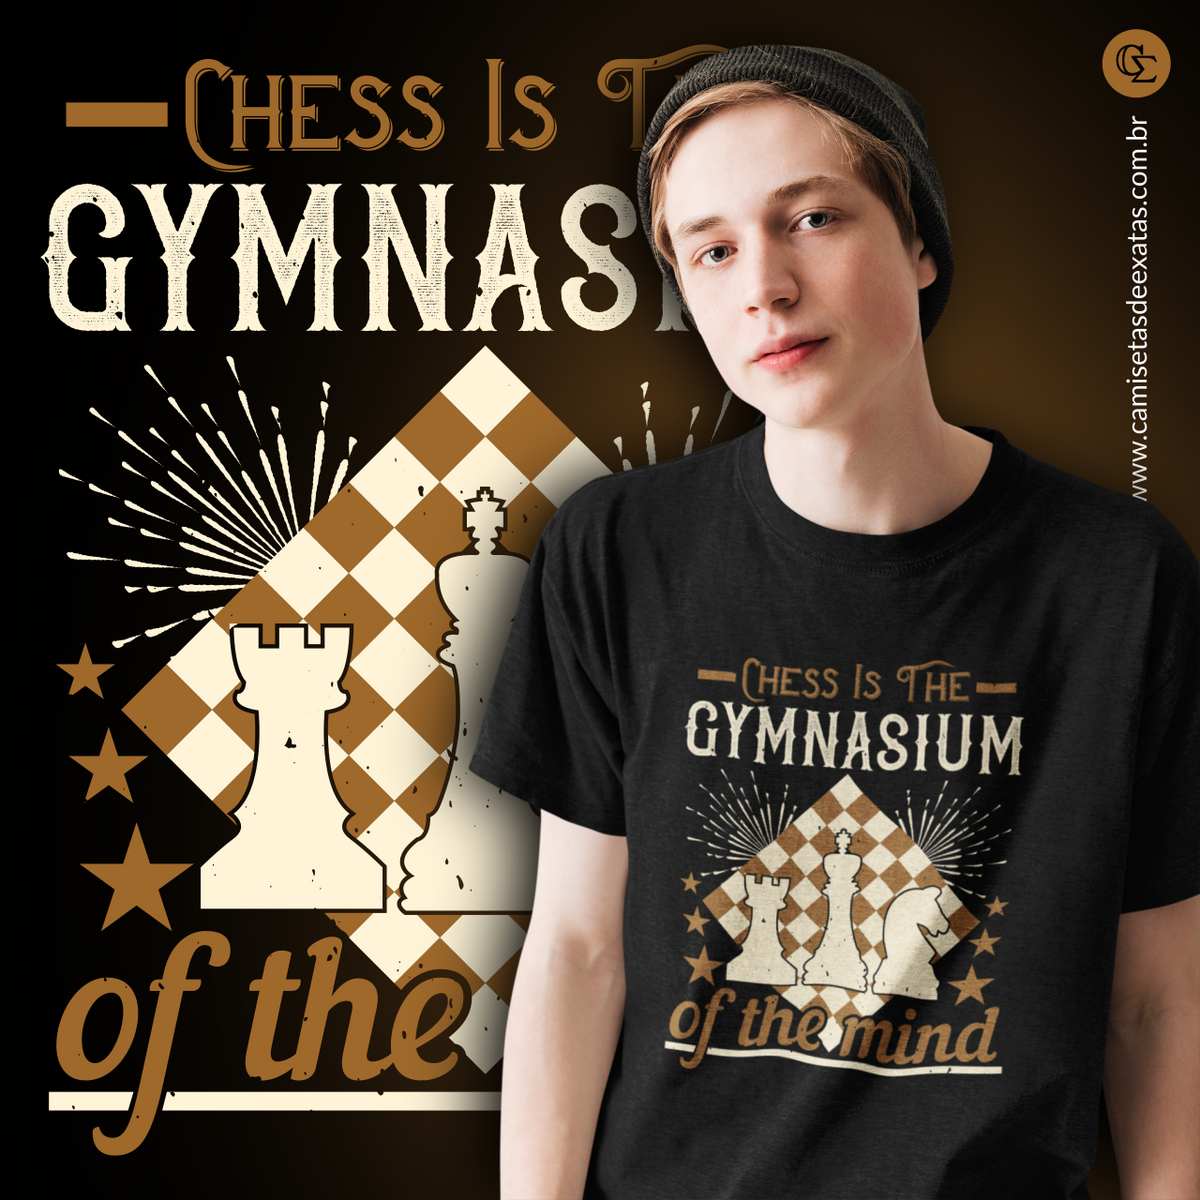 Nome do produto: CHESS IS THE GYMNASIUM OF THE MIND